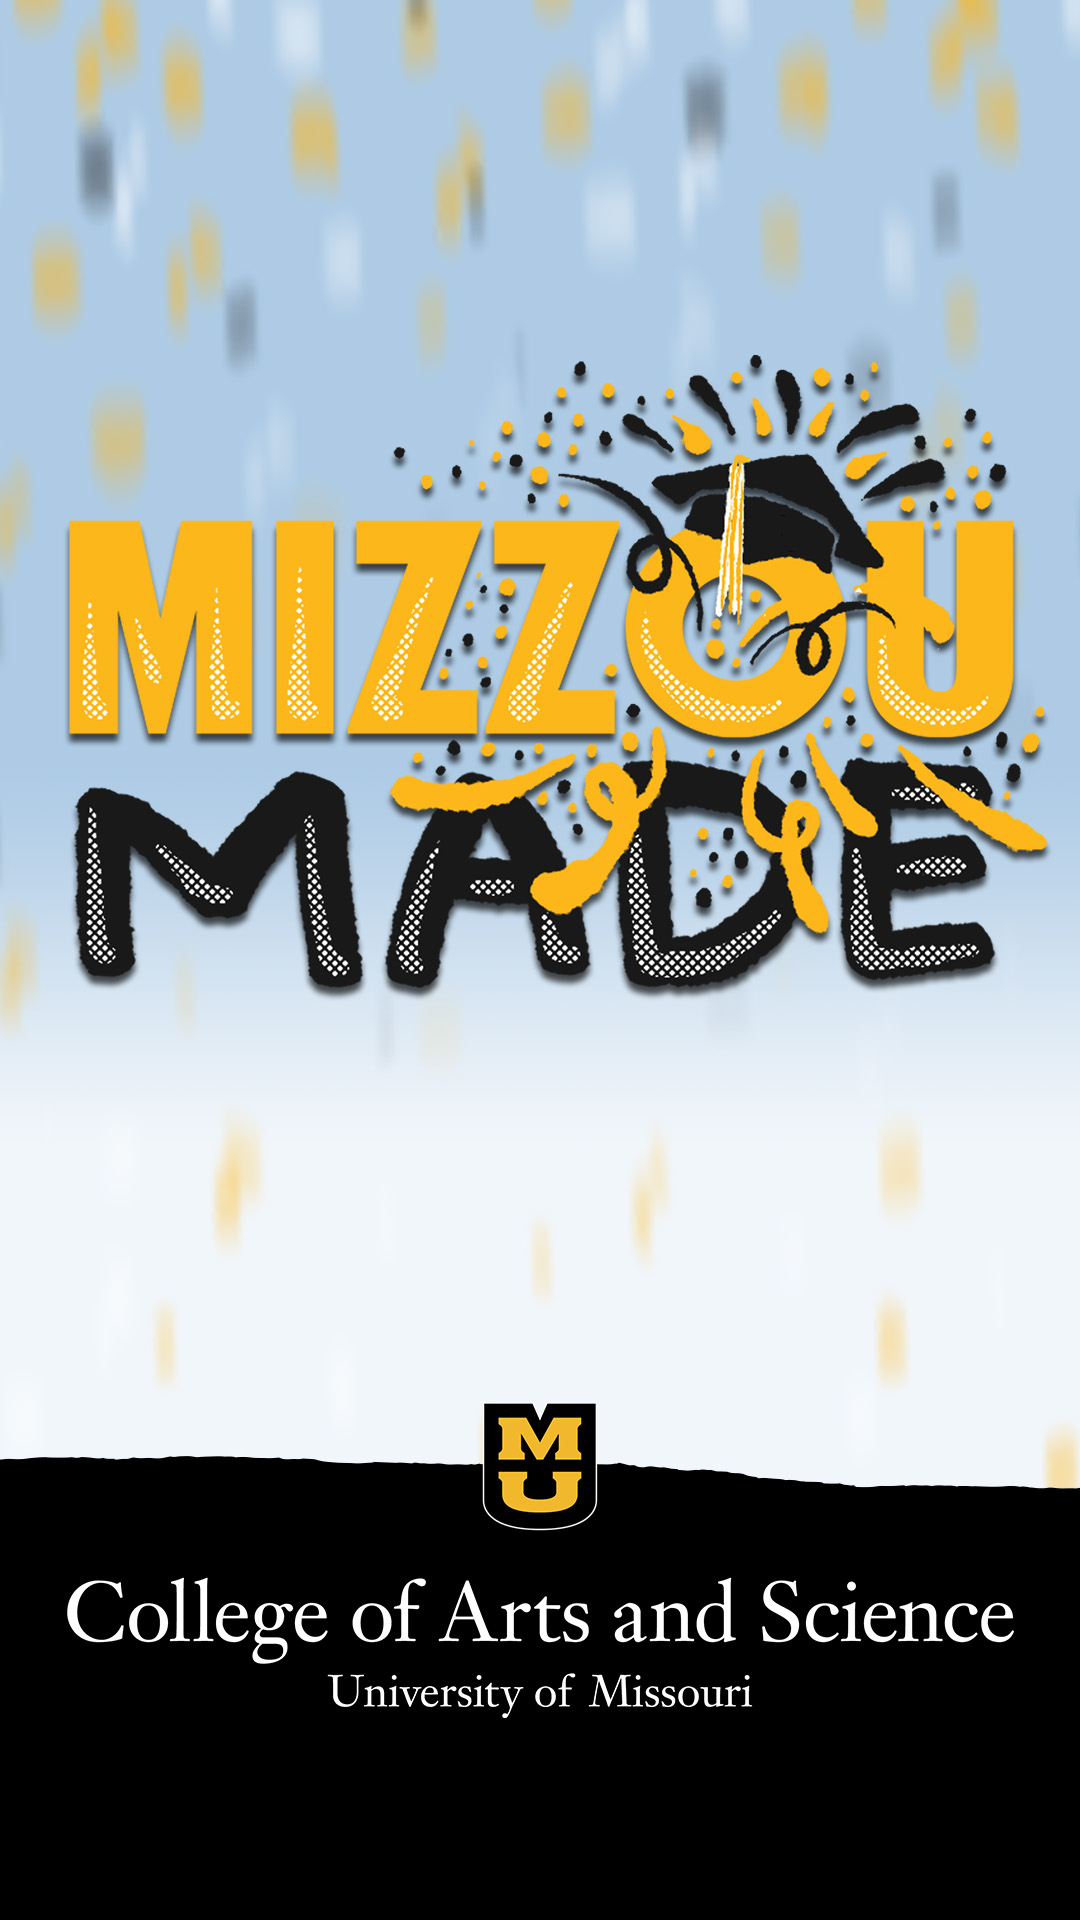 Light blue confetti background with a hand drawn gold bubble Mizzou and black Made stacked underneath it. The 'o' in the Mizzou has a graduation cap with confetti shooting out. The bottom half looks like a ripped black page with a small gold stacked MU logo and the words 